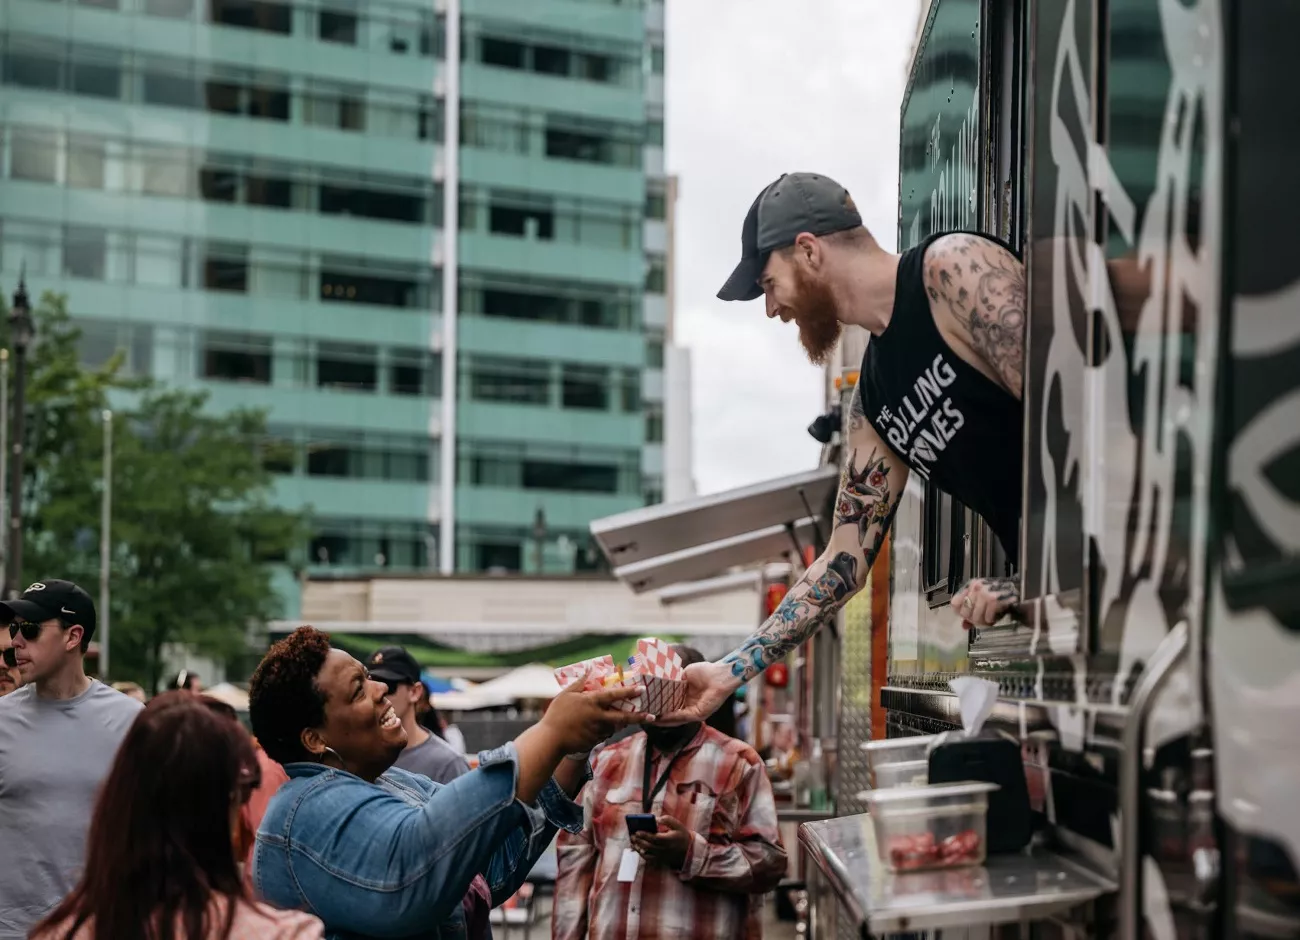 DEMAND GROWS FOR DOWNTOWN STREET EATS FOOD TRUCK RALLY, PROGRAM RETURNS A MONTH EARLY TO CADILLAC SQUARE AND WOODWARD ESPLANADE